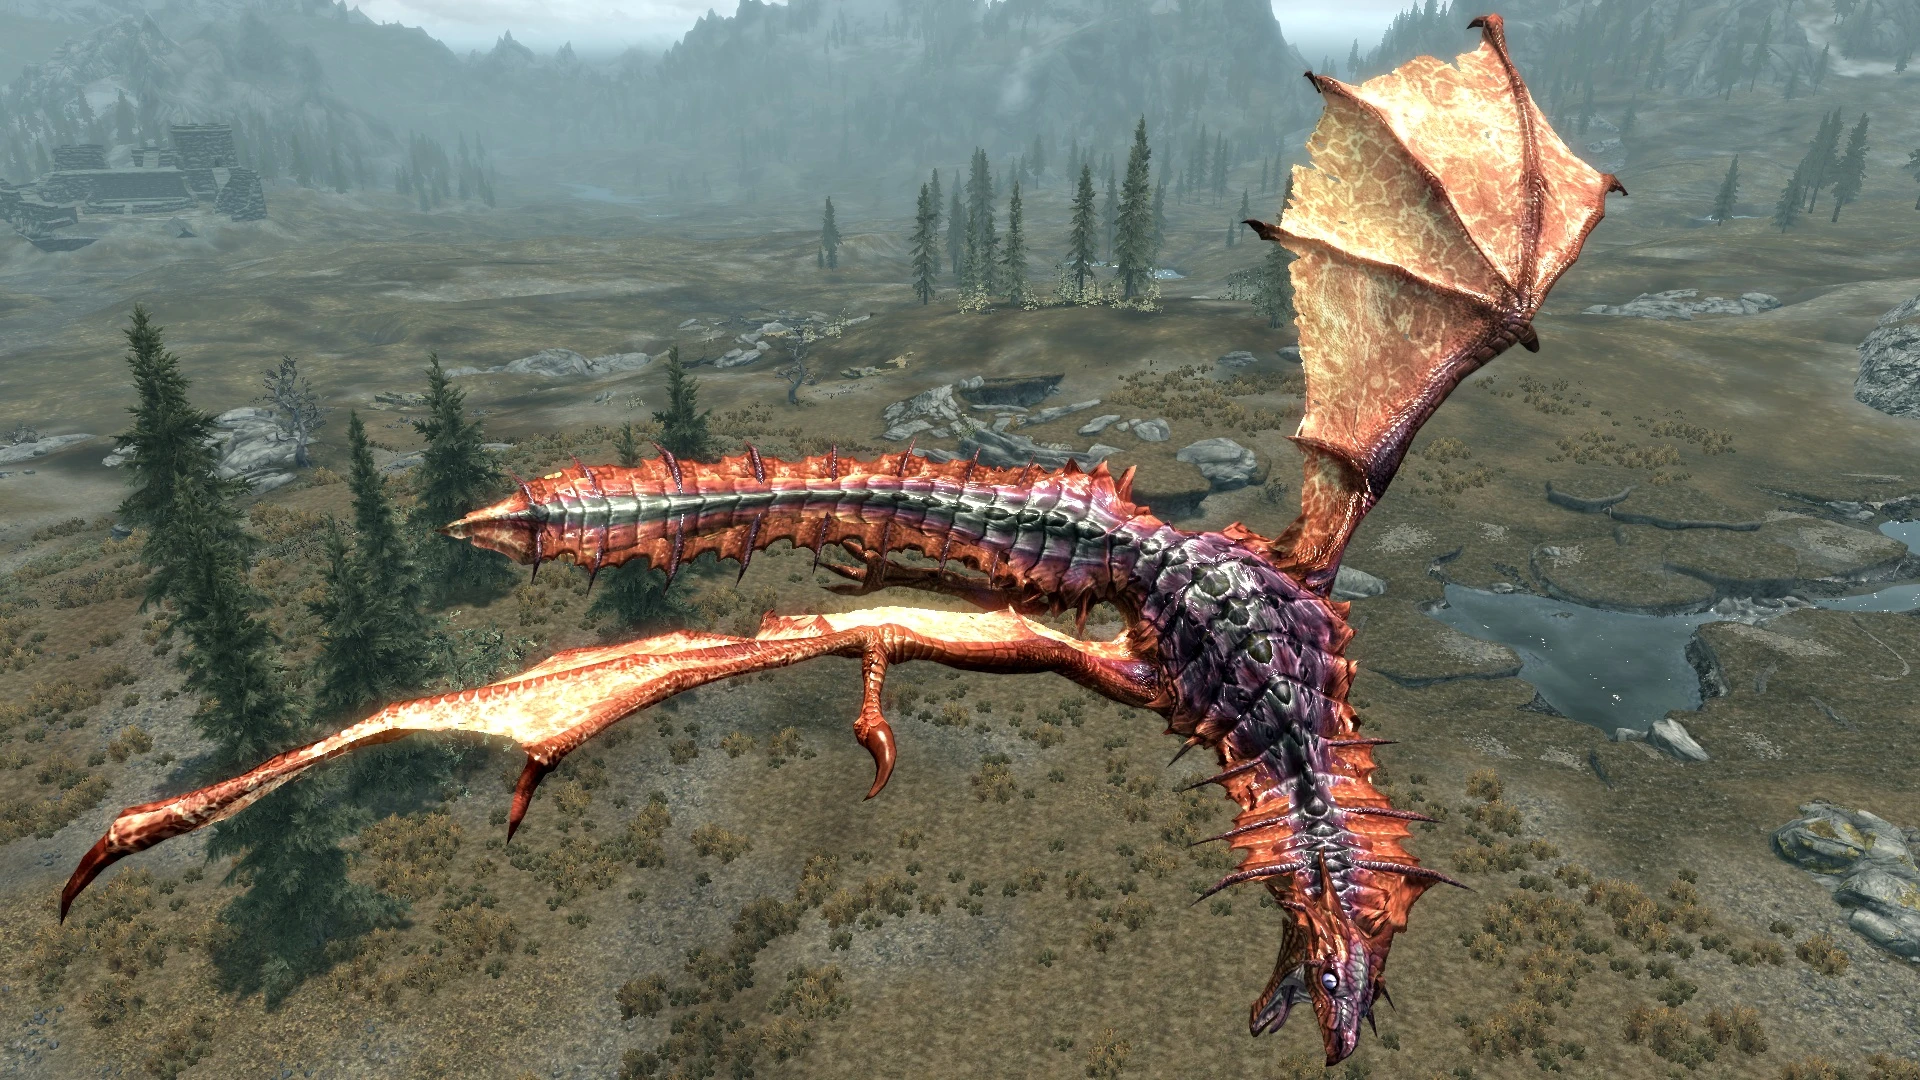 Bellyaches HD Dragon Replacer Pack (SE) at Skyrim Special.